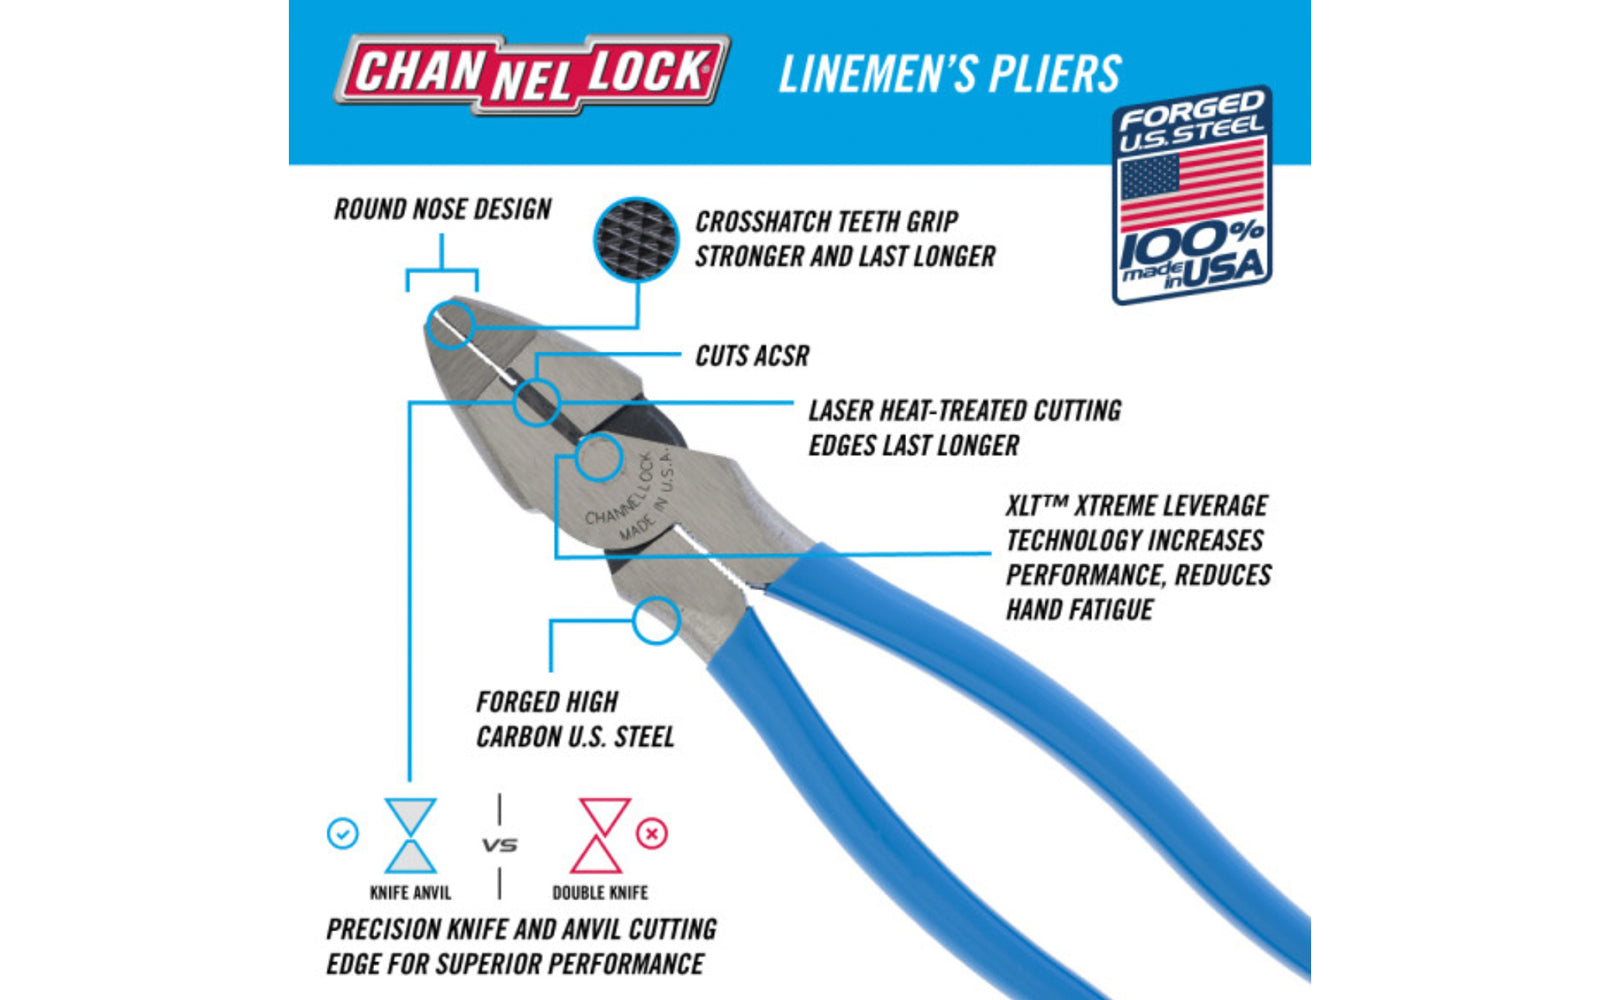 Channellock 8-1/2" Lineman's Pliers "XLT". Round Nose Style. Model 368. Forged high carbon U.S. steel for maximum strength & durability is specially coated for rust prevention. Crosshatch teeth to provide maximum grip. Channelock Linemen's Pliers. Cuts ACSR. Made in USA.